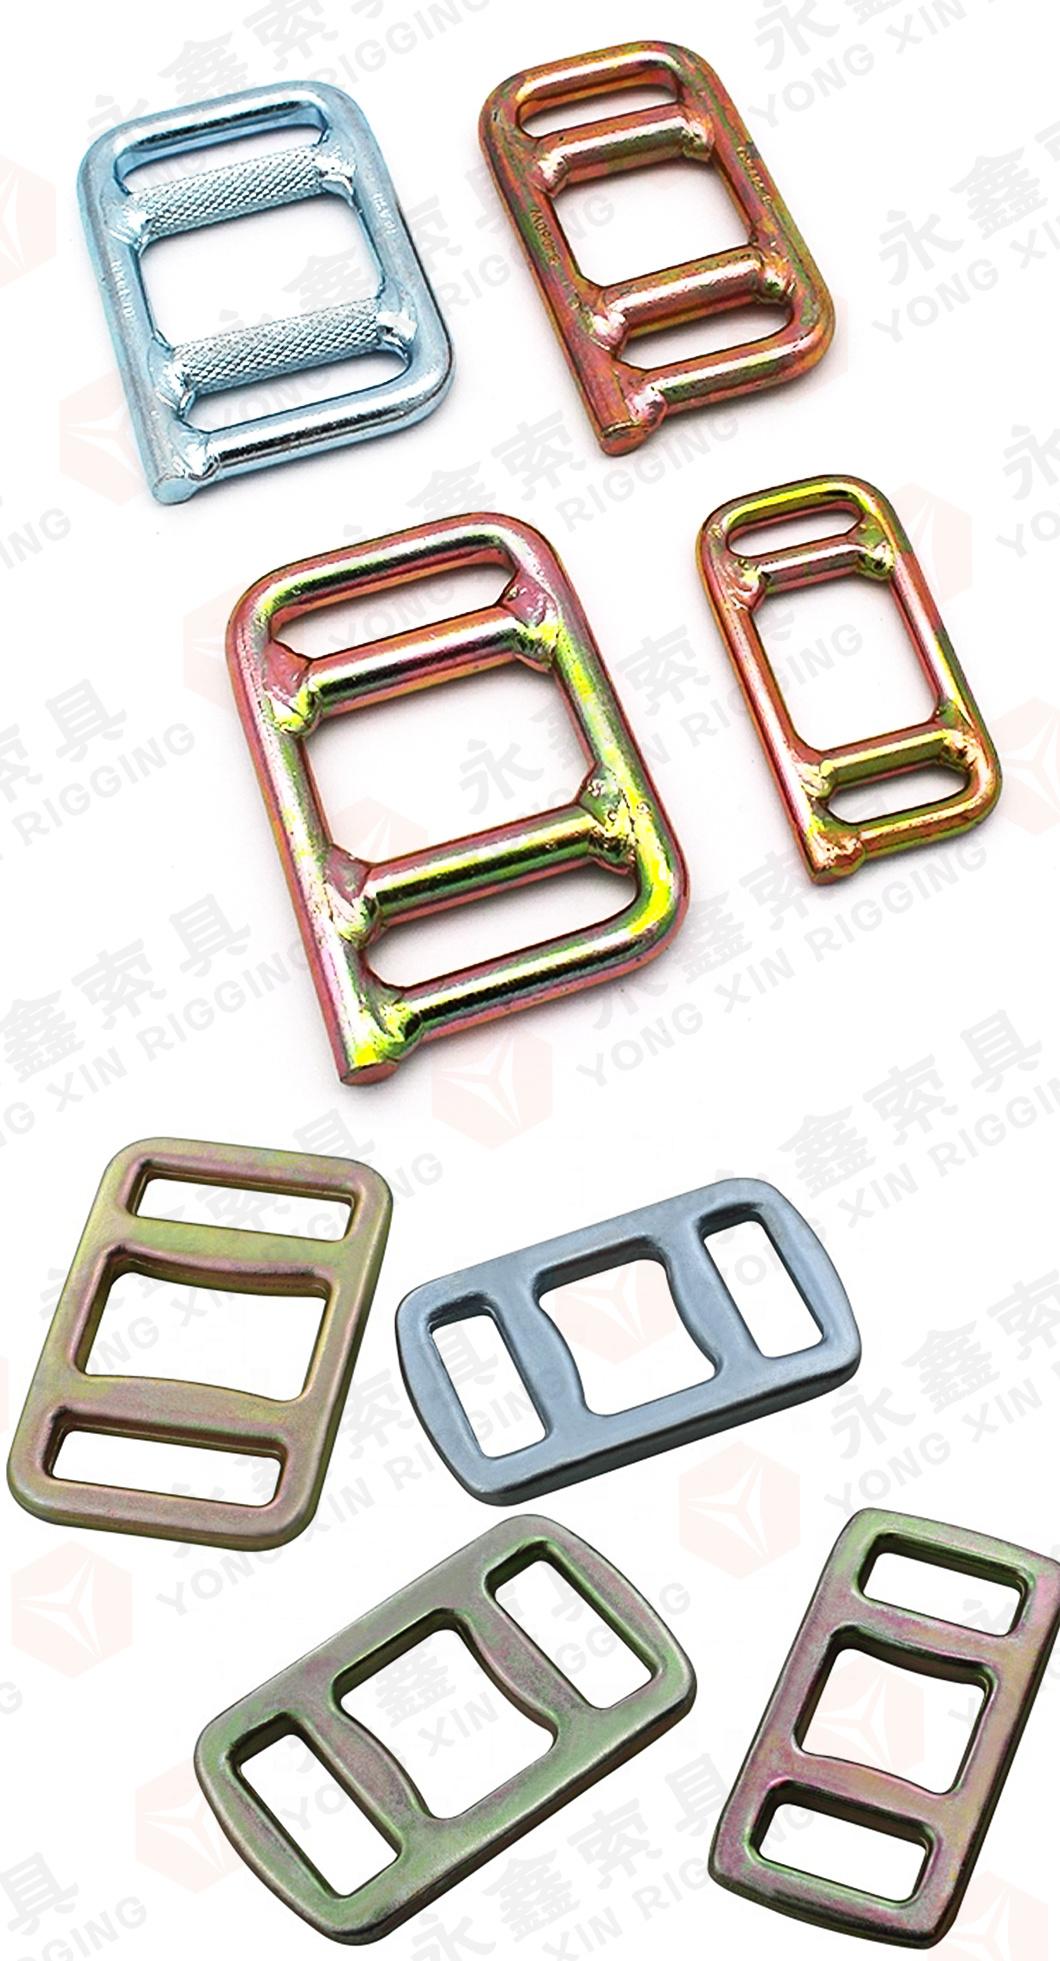 30mm 40mm 50mm Galvanized Forged Metal Adjuster One Way Lashing Buckle for Climbing and Lashing